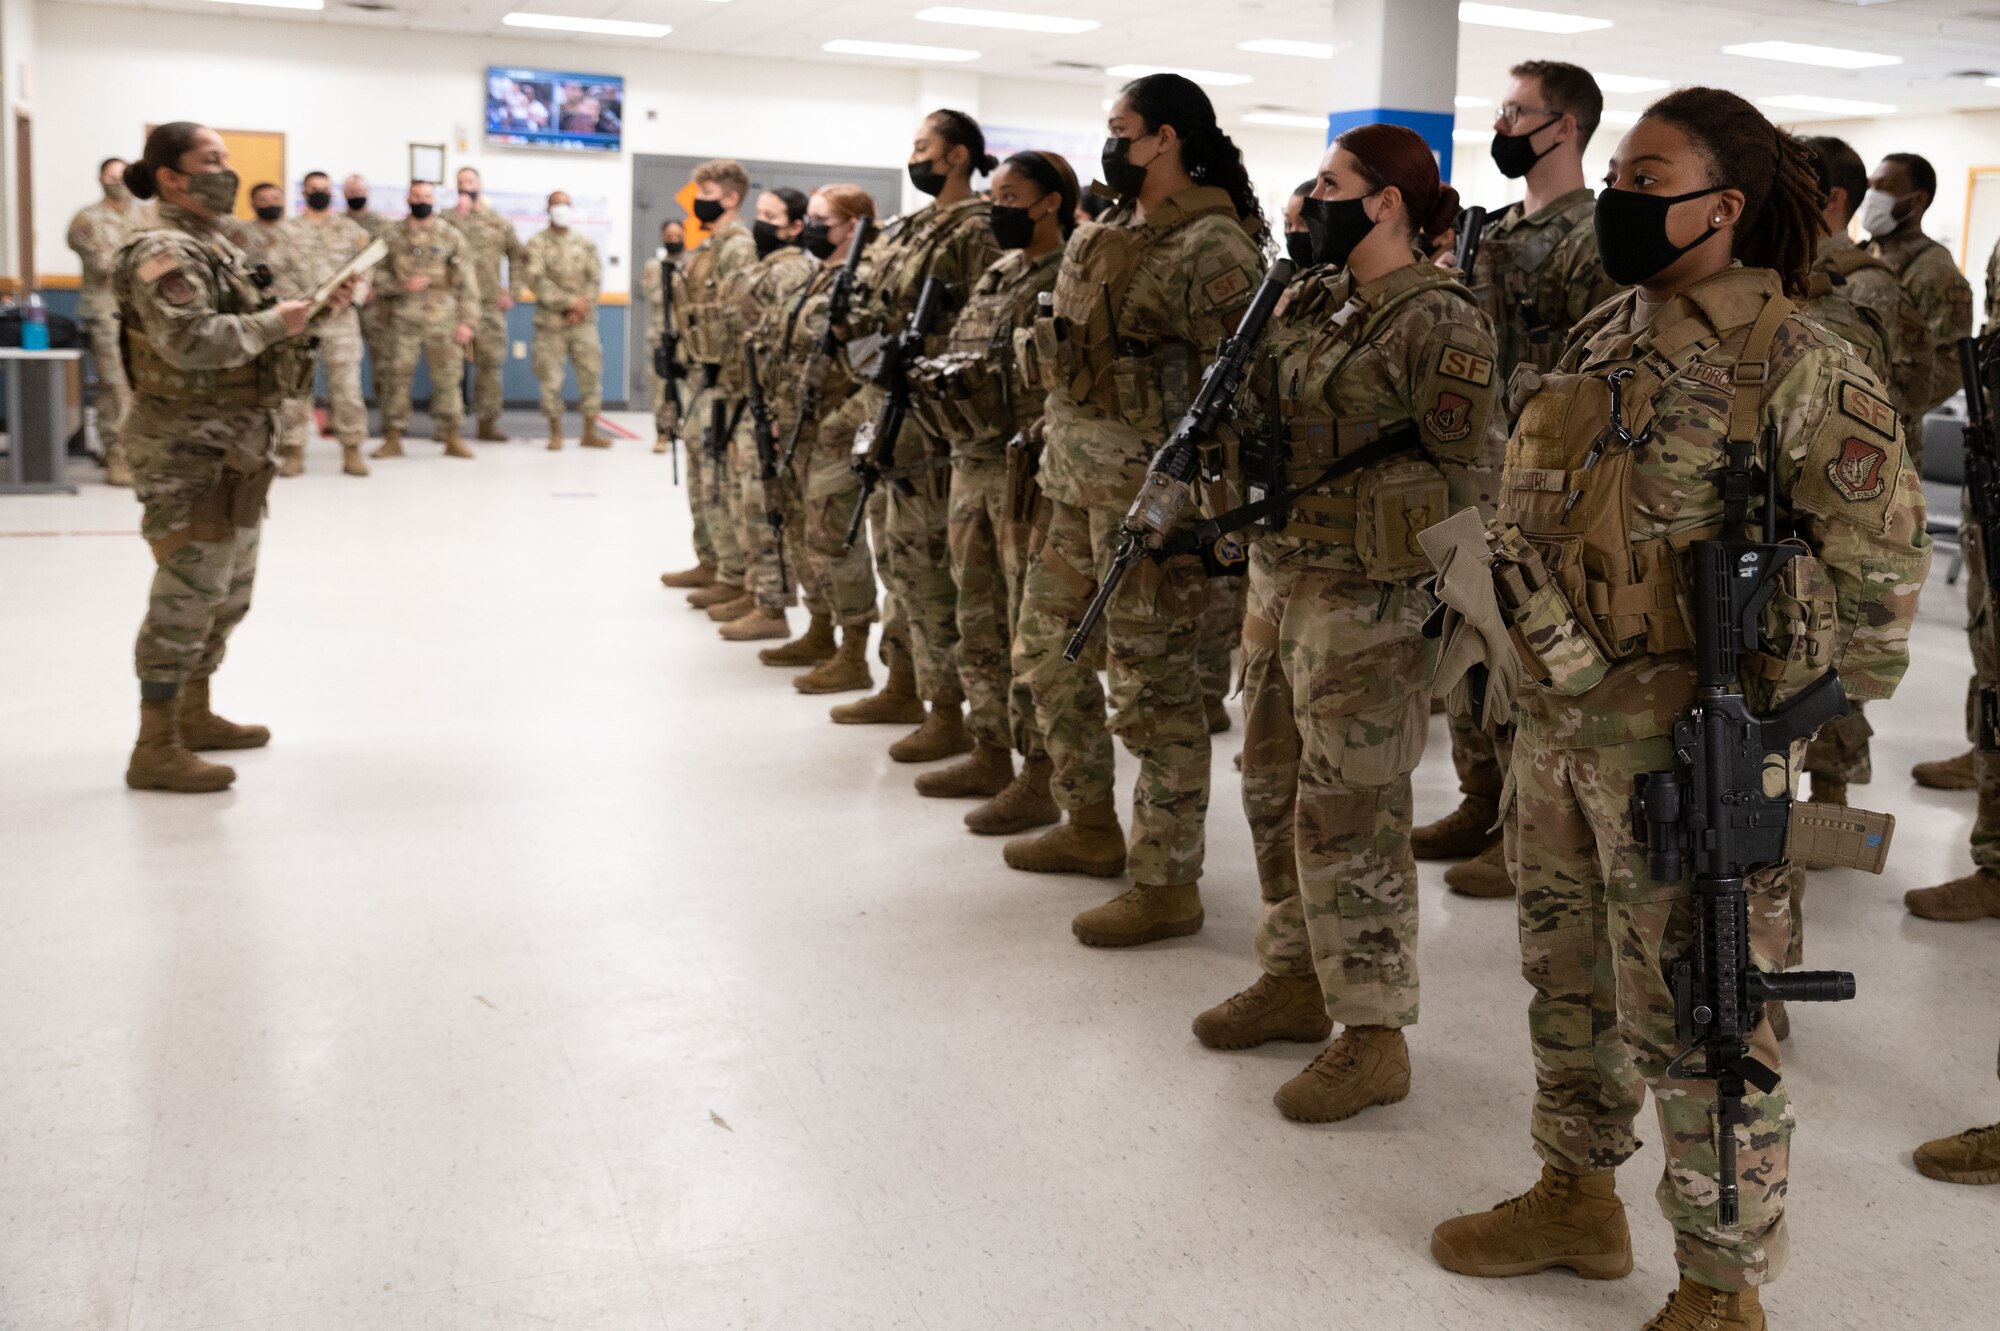 Master Sgt. Sonia Toro-Valles, 51st Security Forces Squadron flight chief, conducts roll call to a predominately female flight at Osan Air Base, Republic of Korea, March 31, 2022.